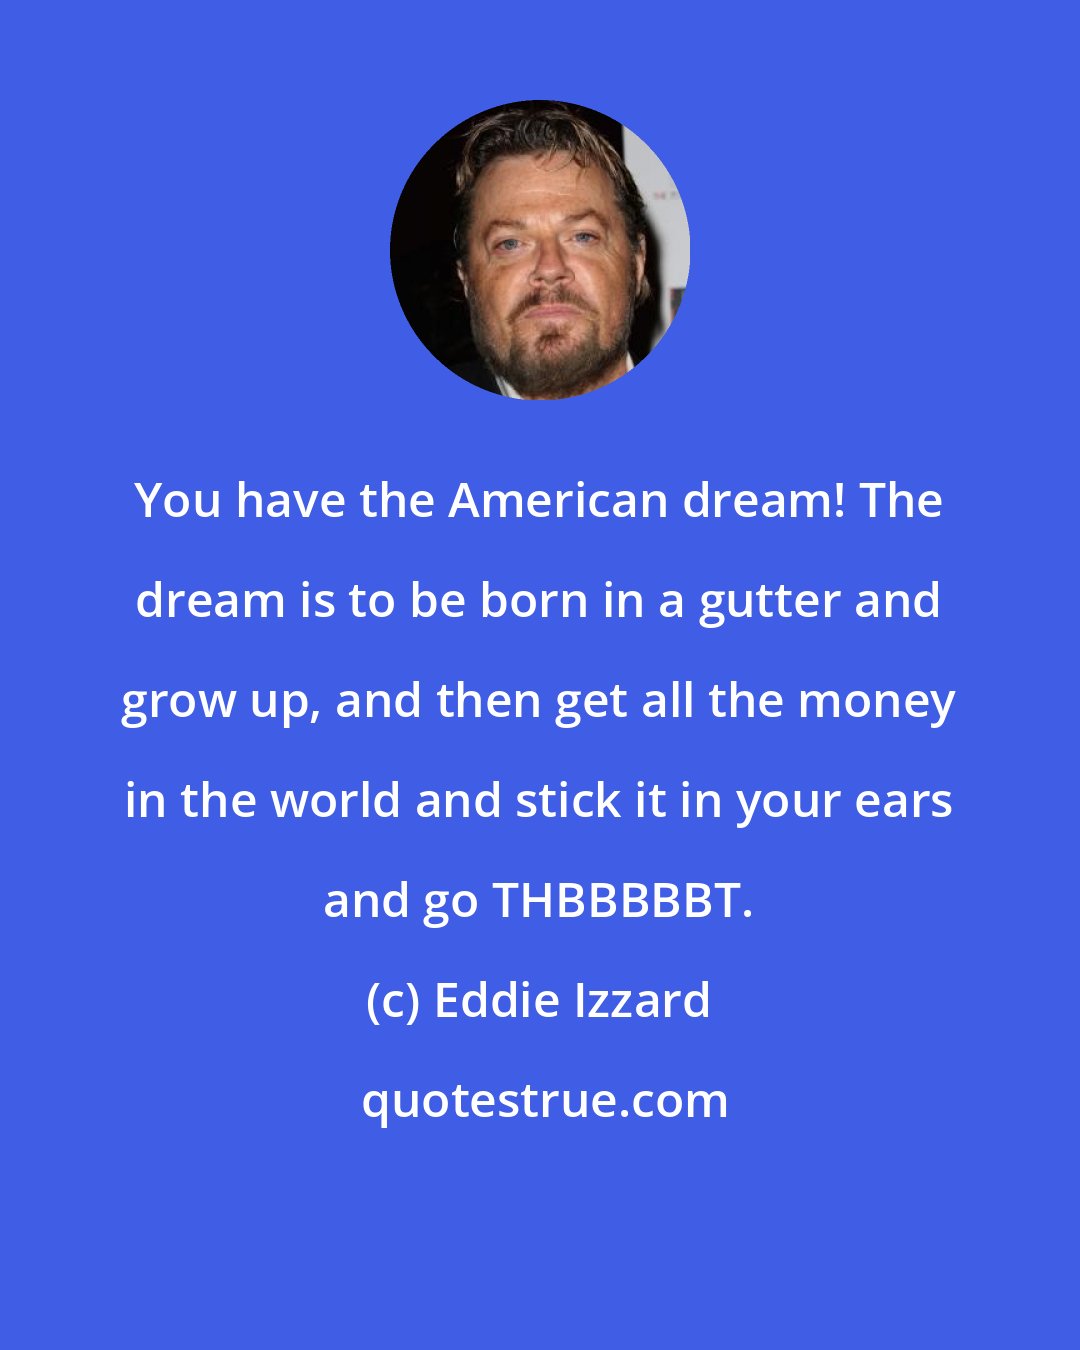 Eddie Izzard: You have the American dream! The dream is to be born in a gutter and grow up, and then get all the money in the world and stick it in your ears and go THBBBBBT.